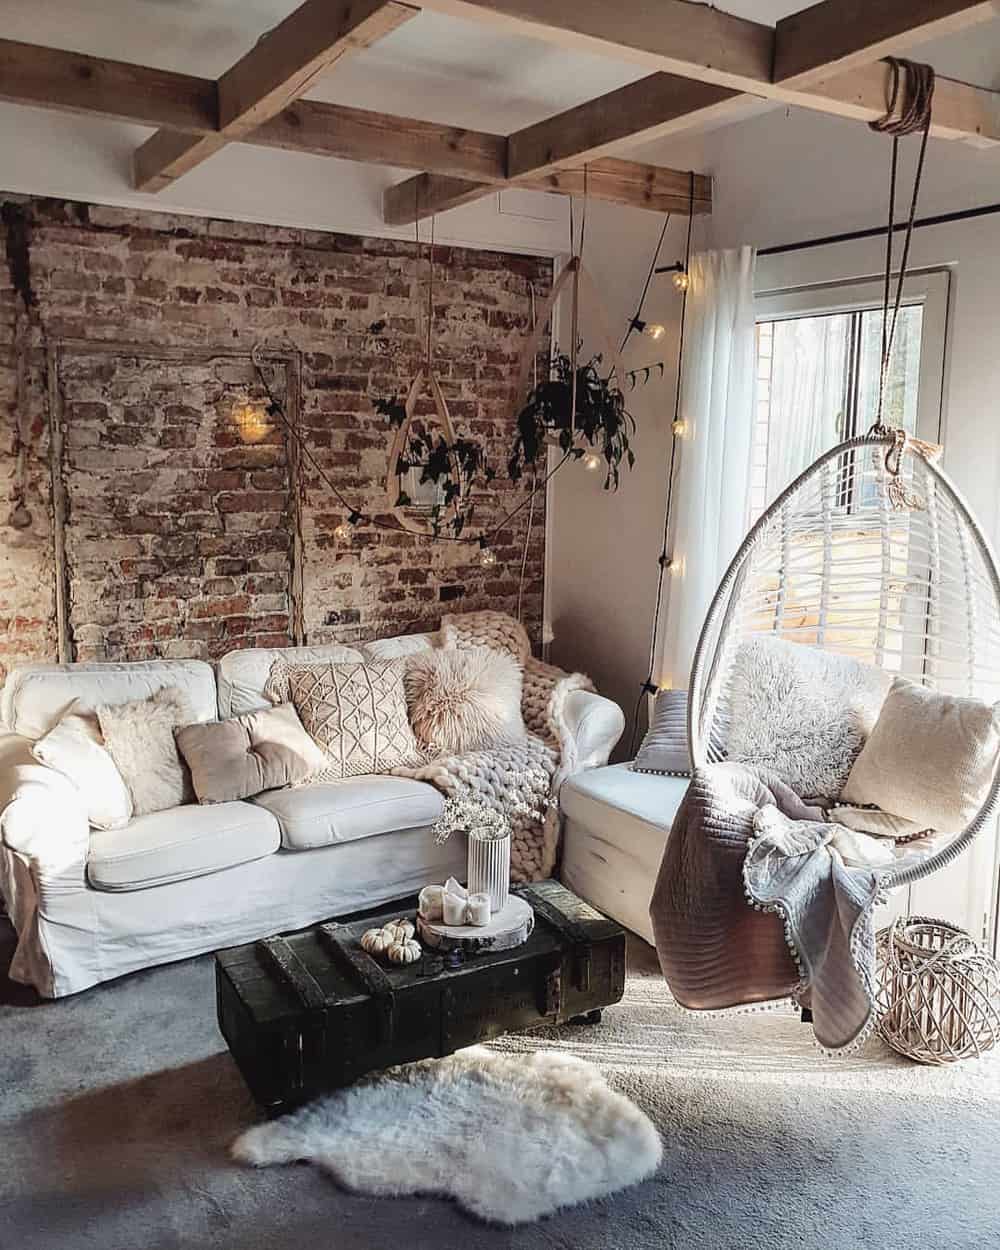 Decorate Your Living Room With These 14 Inspiring Wall Ideas Interior Fun